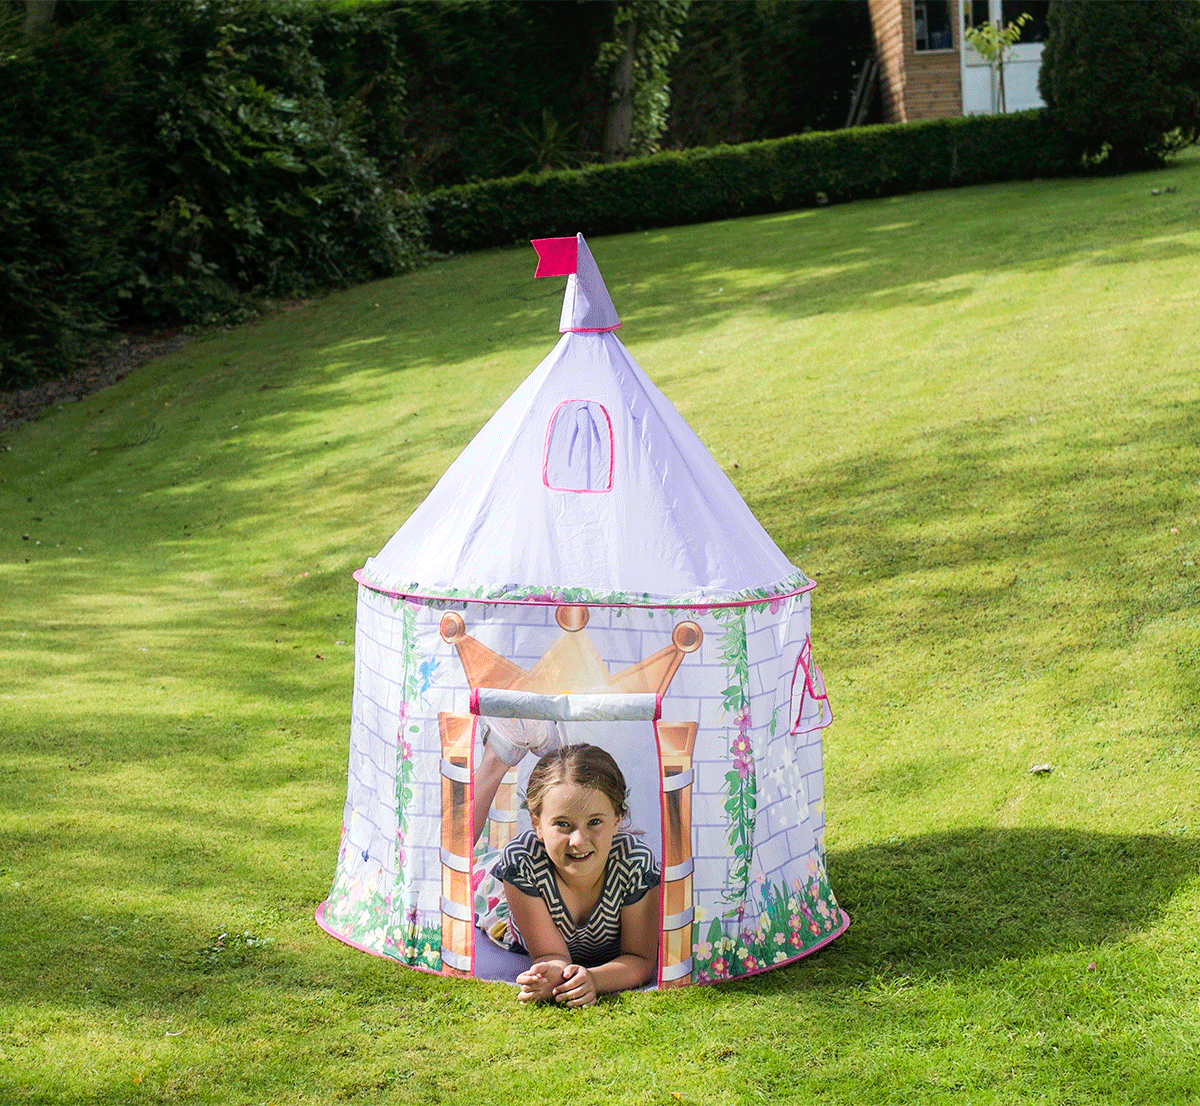 Traditional Garden Games Fairytale Princess Play Tent